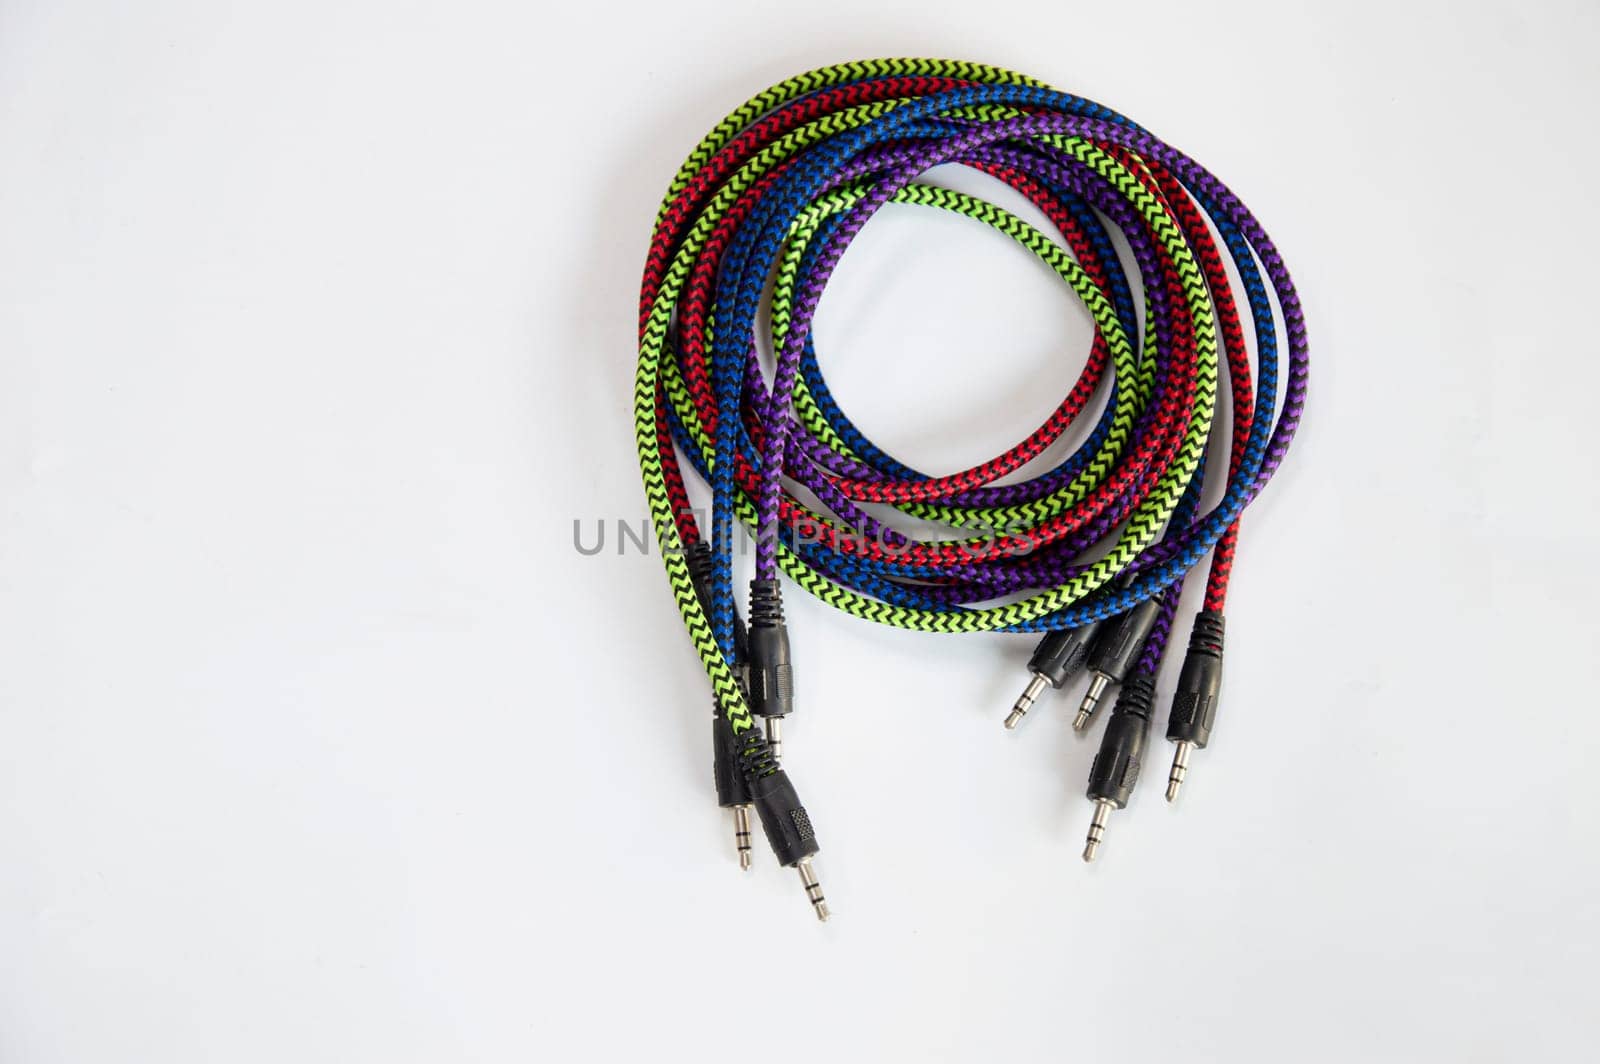 AUX audio cable on a white background by boonruen